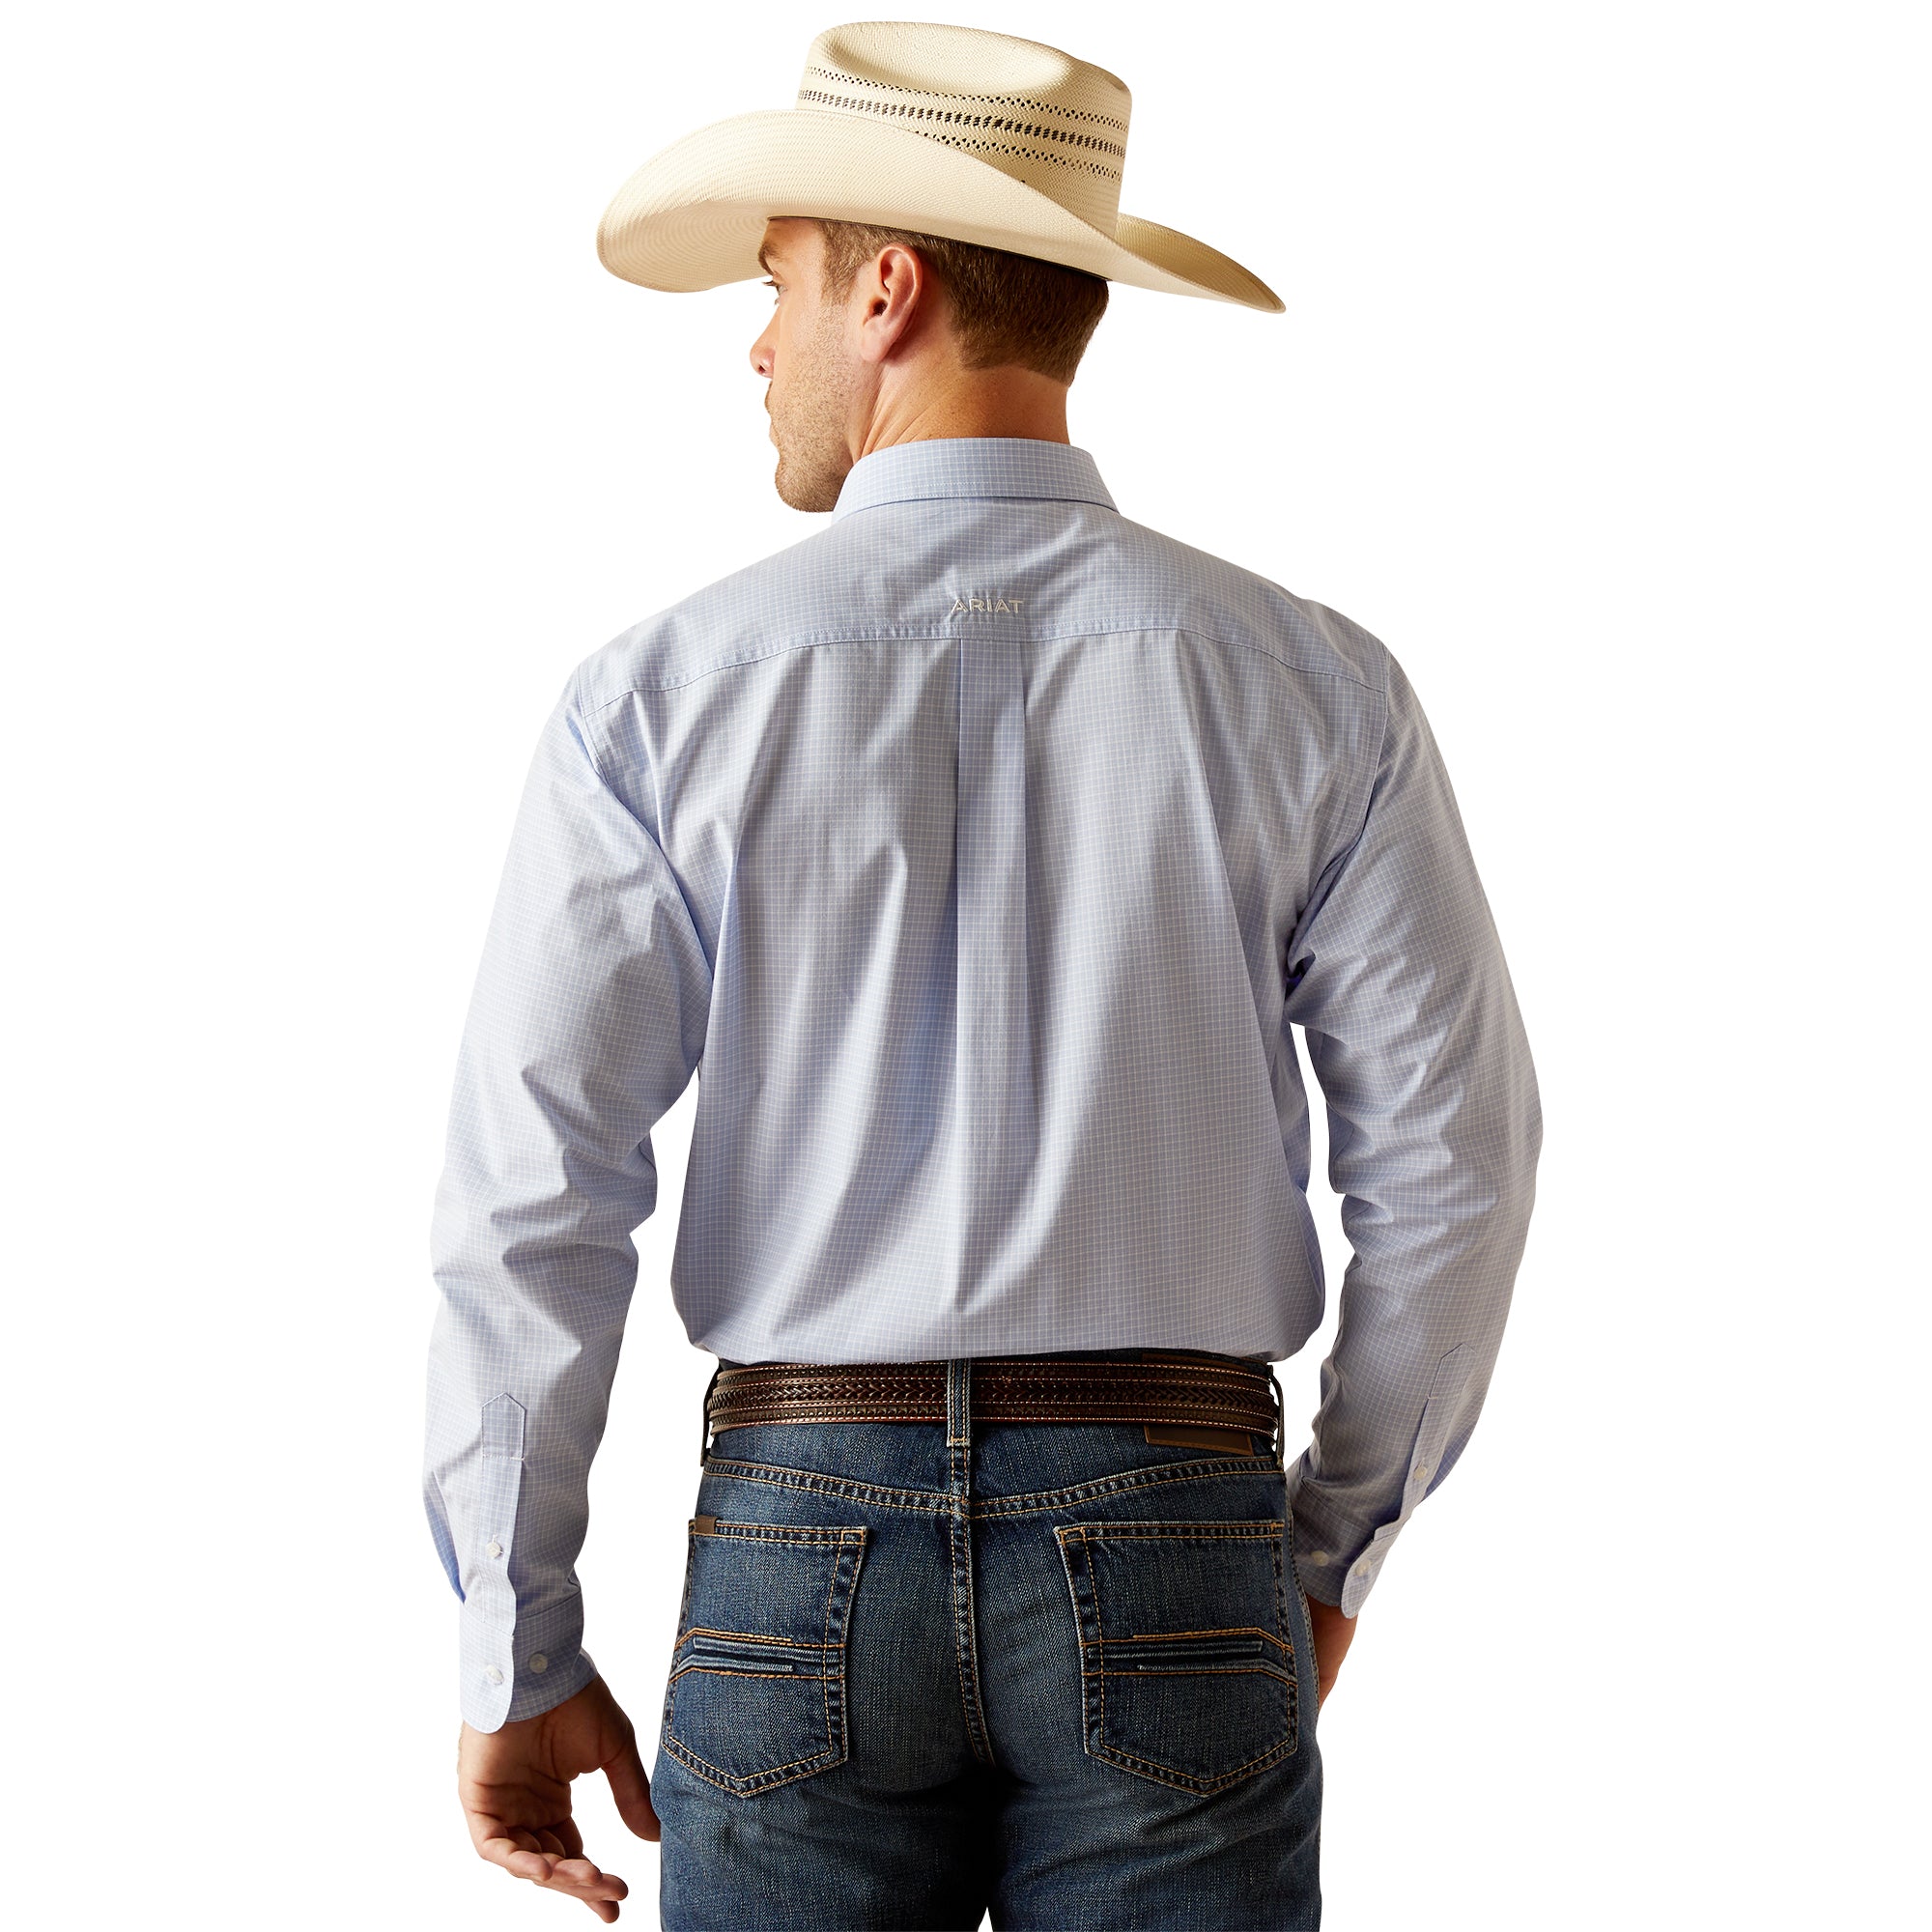 Ariat Shirt Pro Series Dabney Classic Fit back